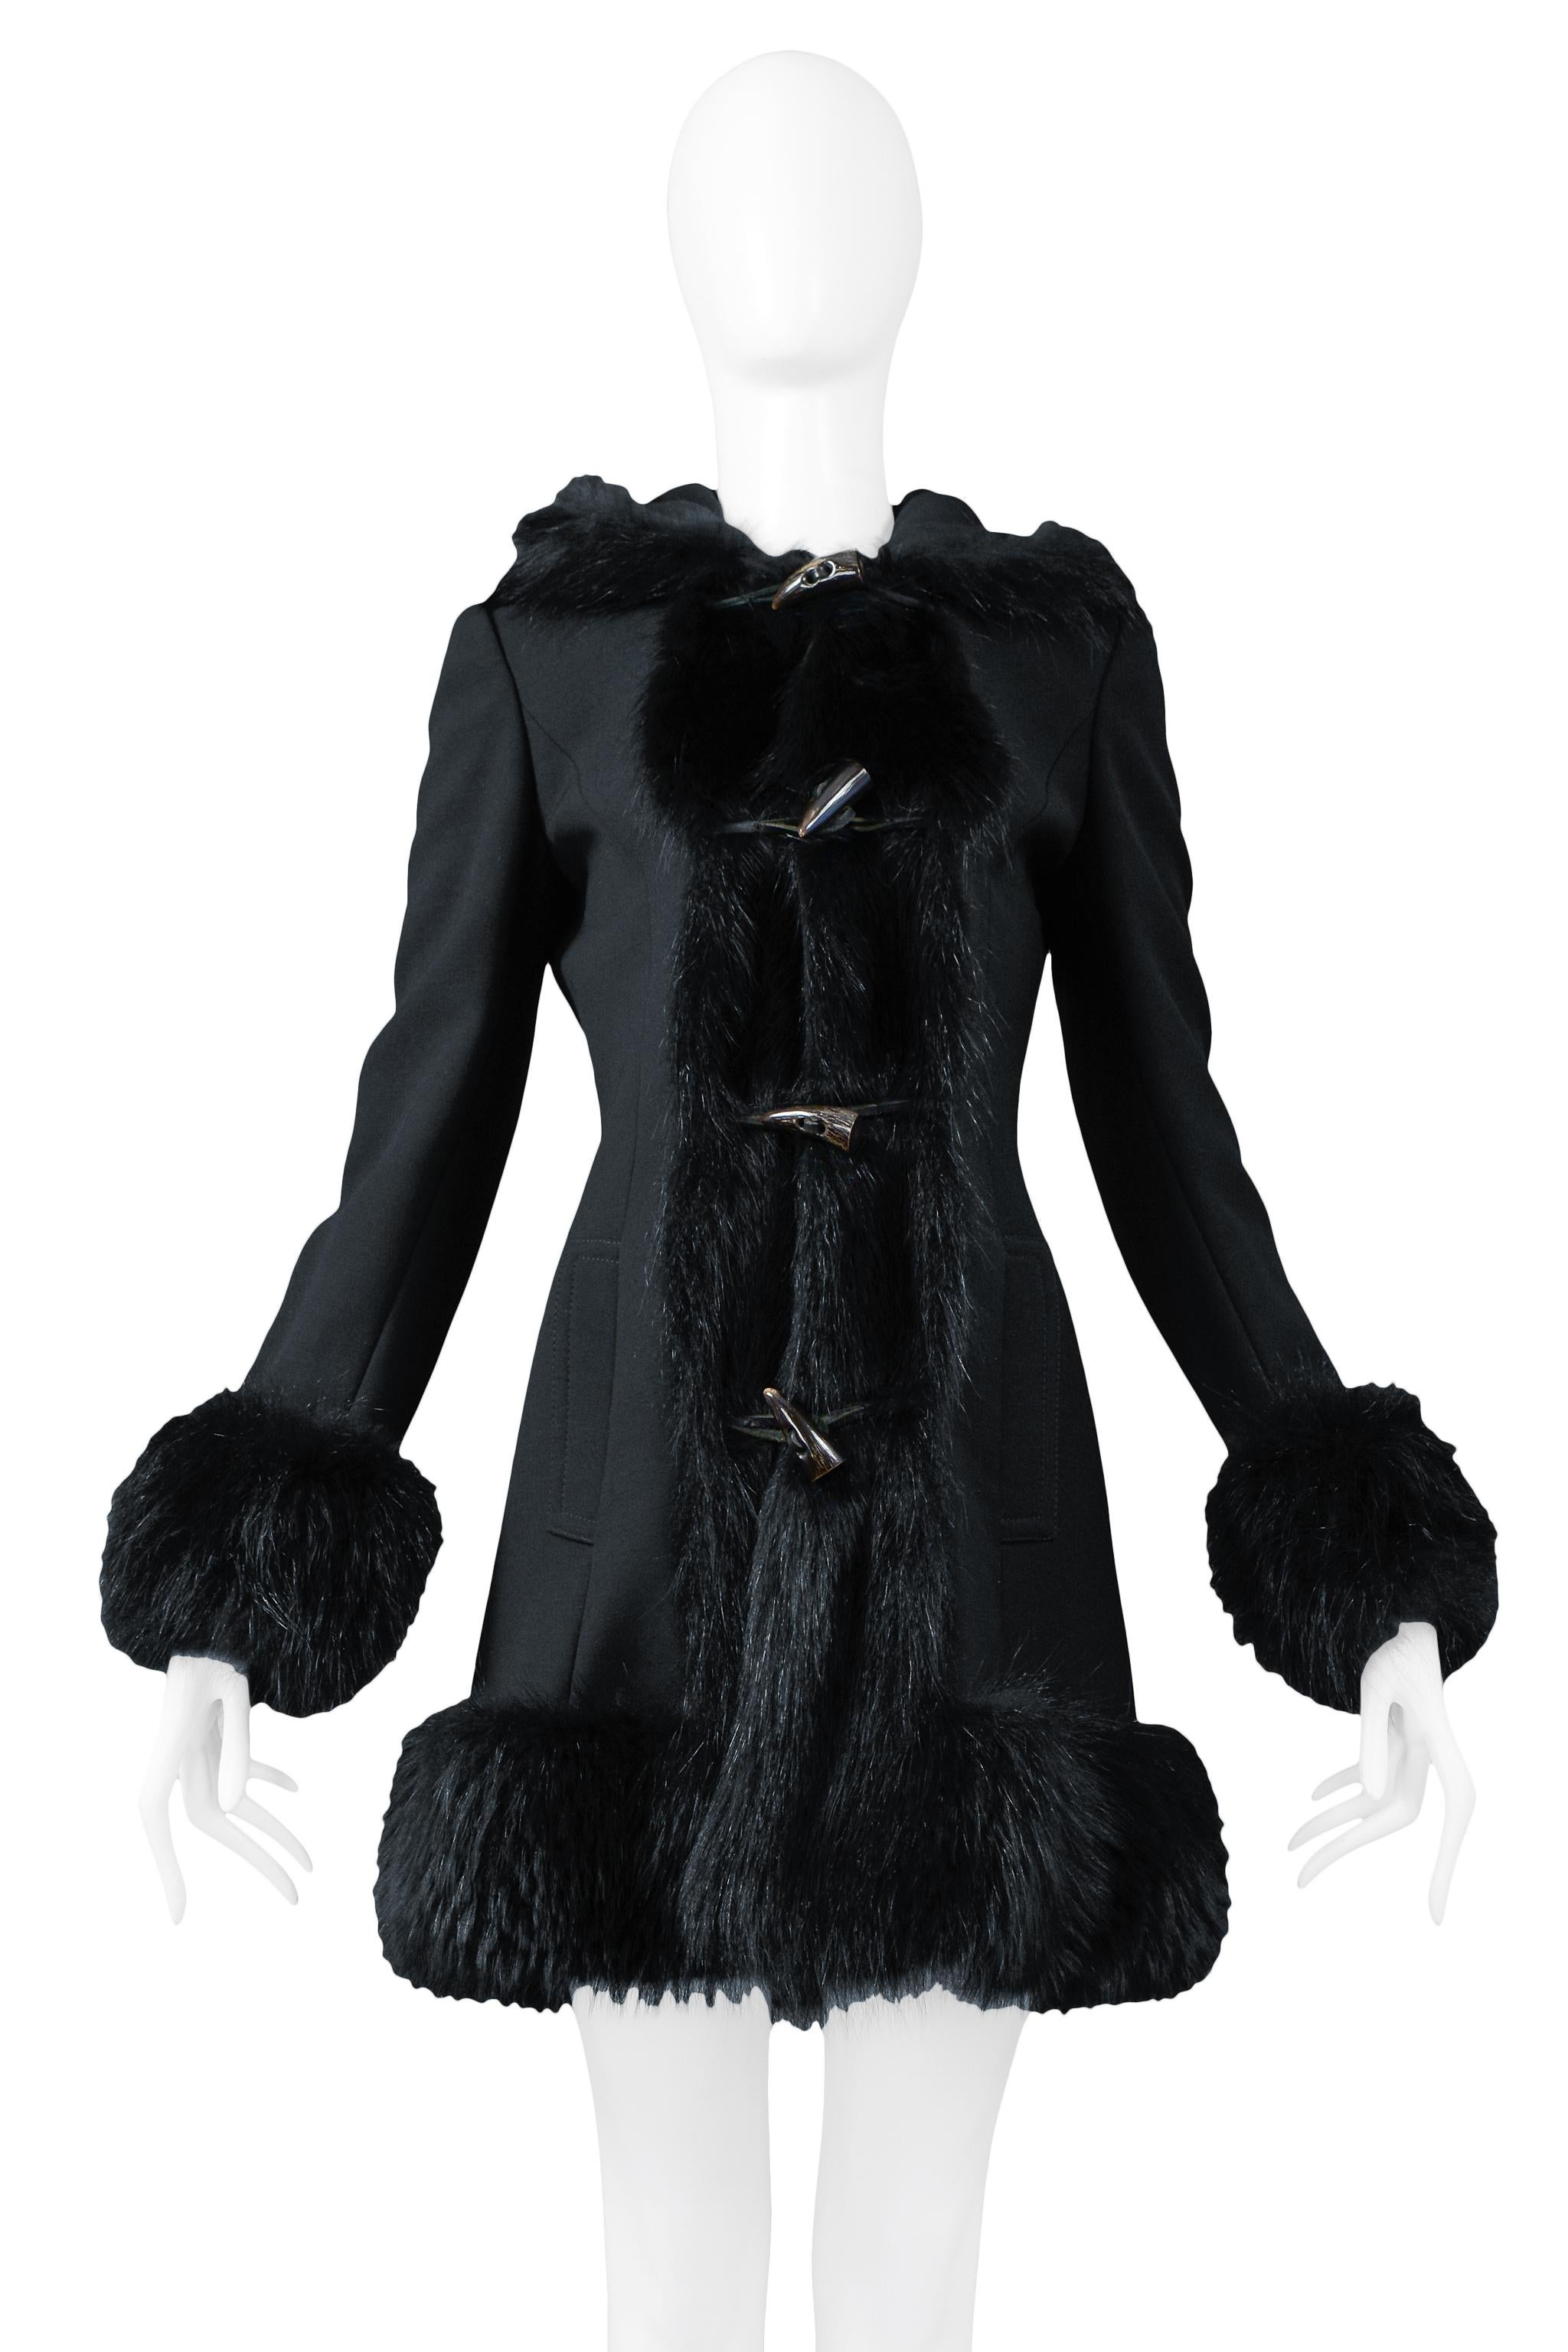 Dolce Black Wool Toggle Coat With Fur Trim Hood In Excellent Condition For Sale In Los Angeles, CA